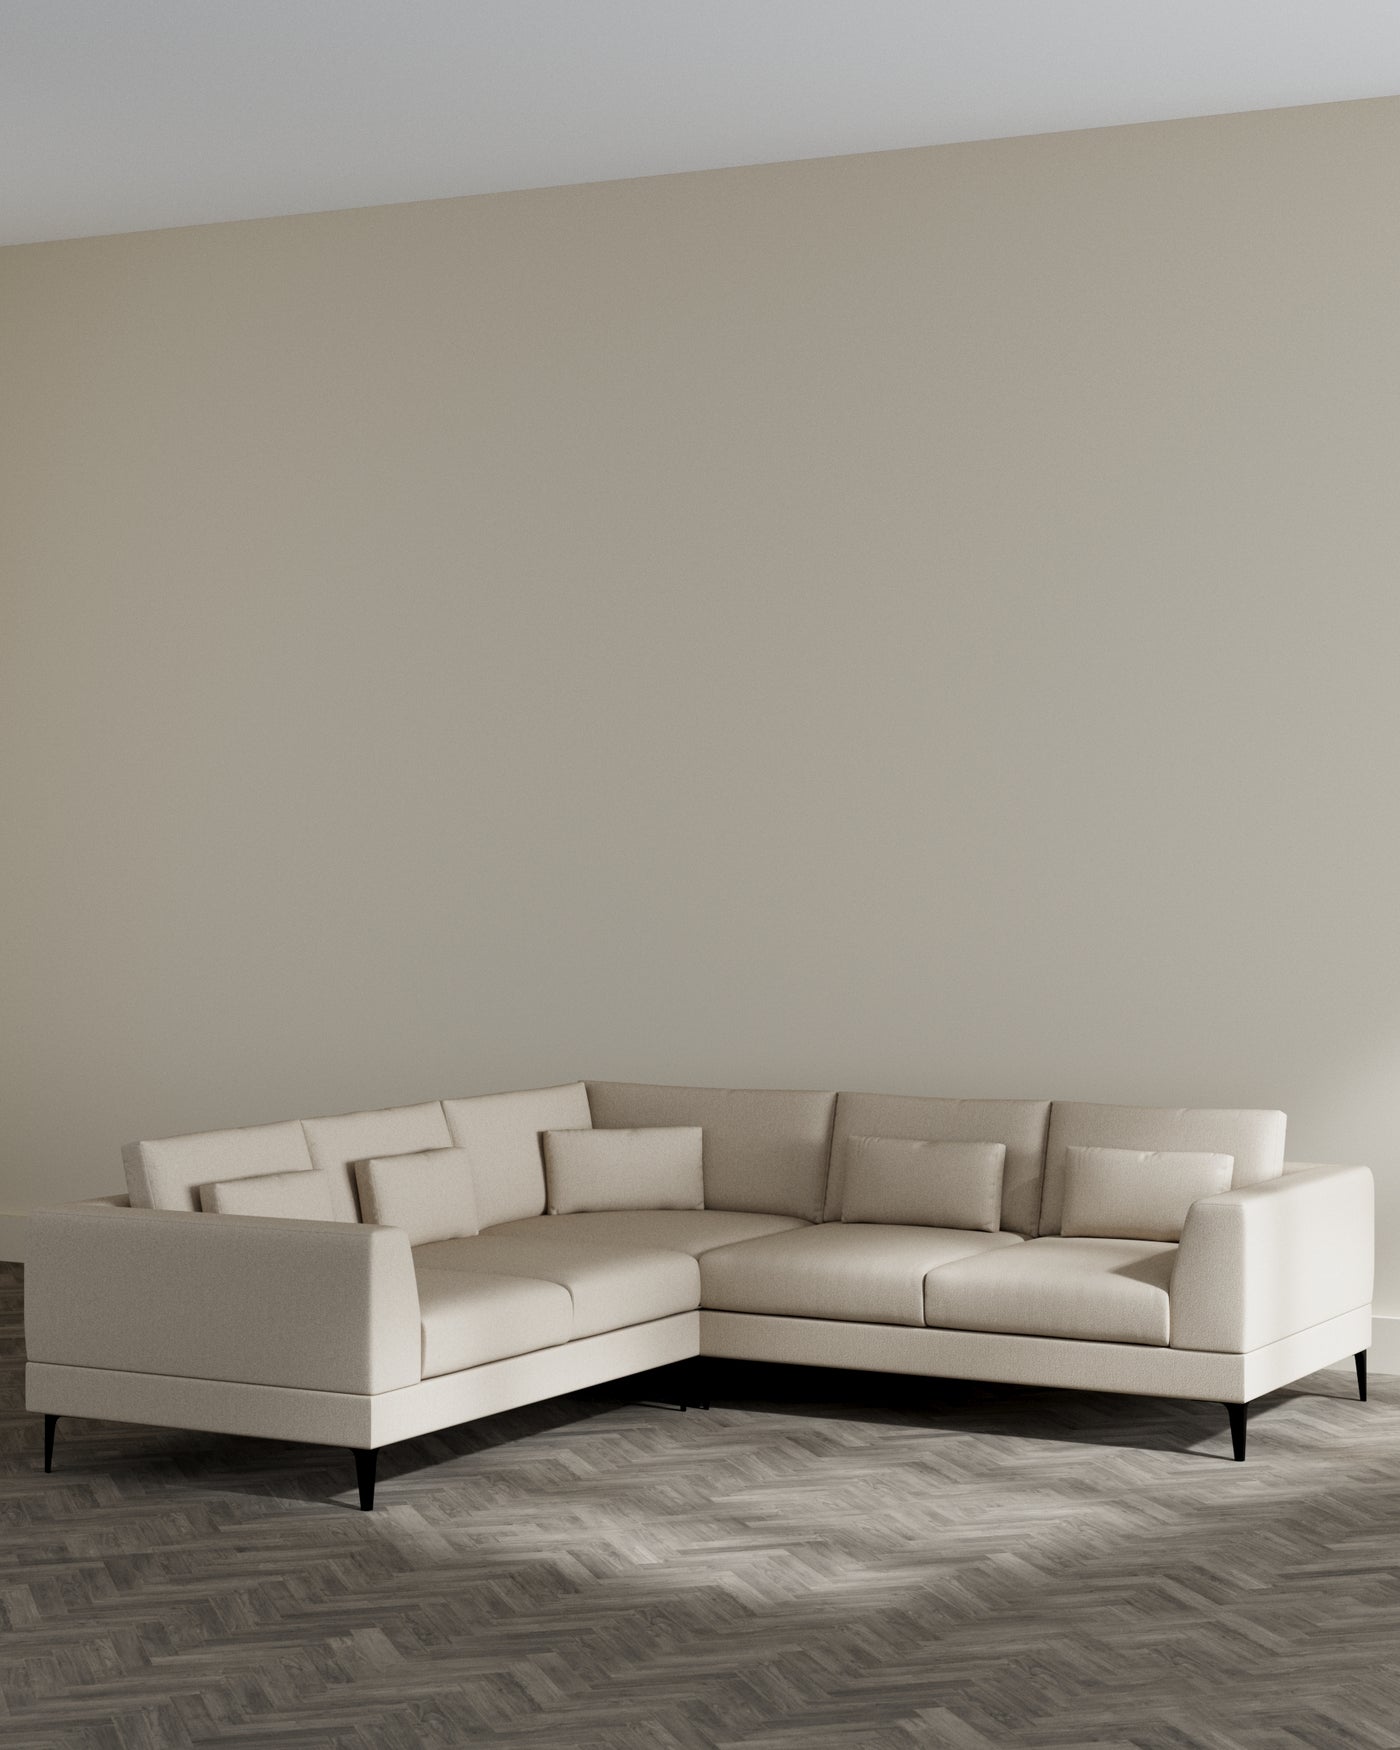 Modern L-shaped sectional sofa in a light cream fabric with minimalist design and slim black legs, positioned in a neutral-toned room with wood flooring.